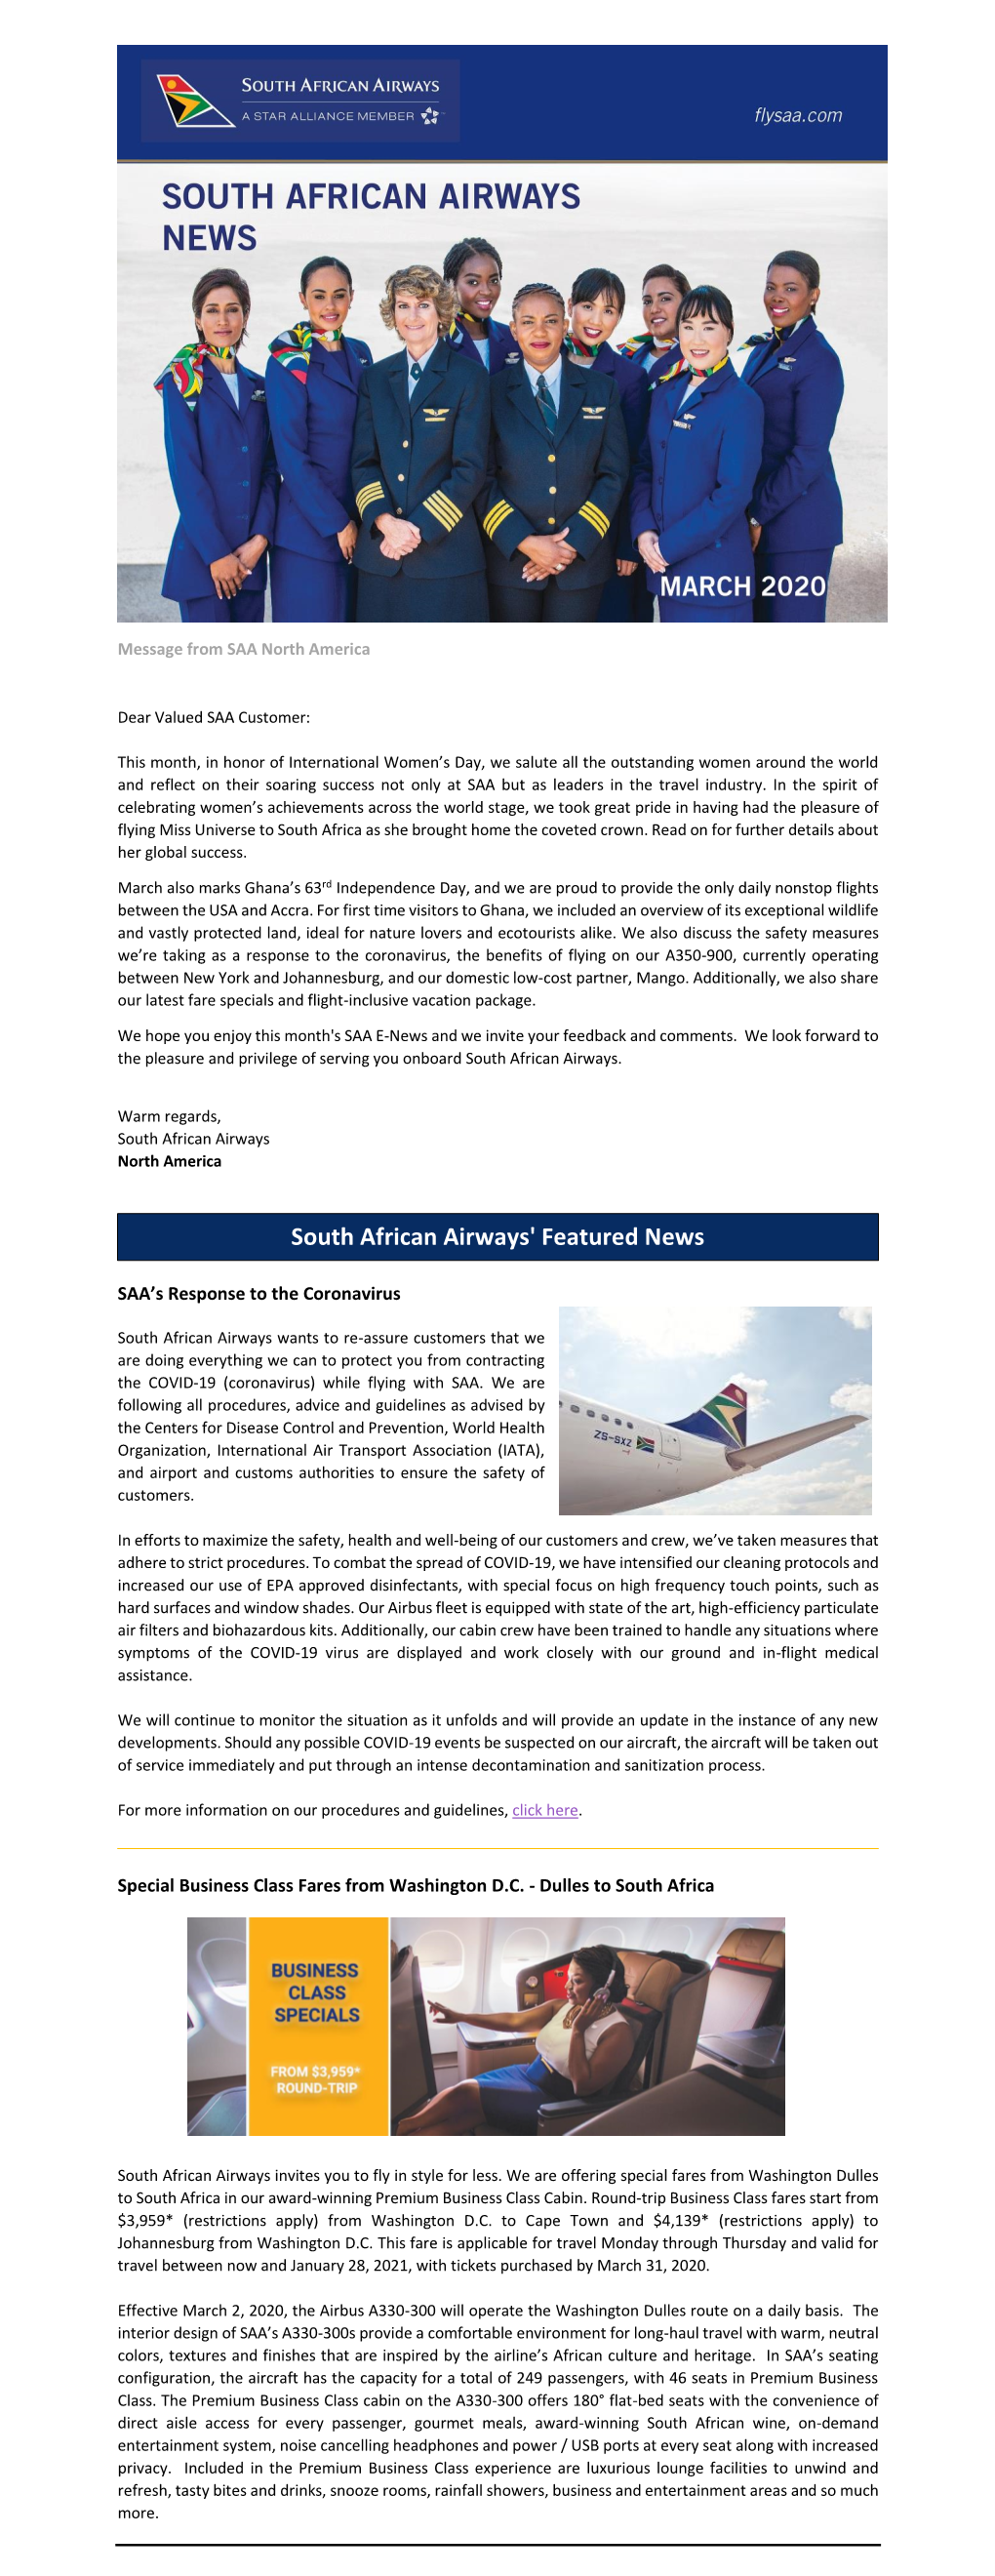 South African Airways' Featured News